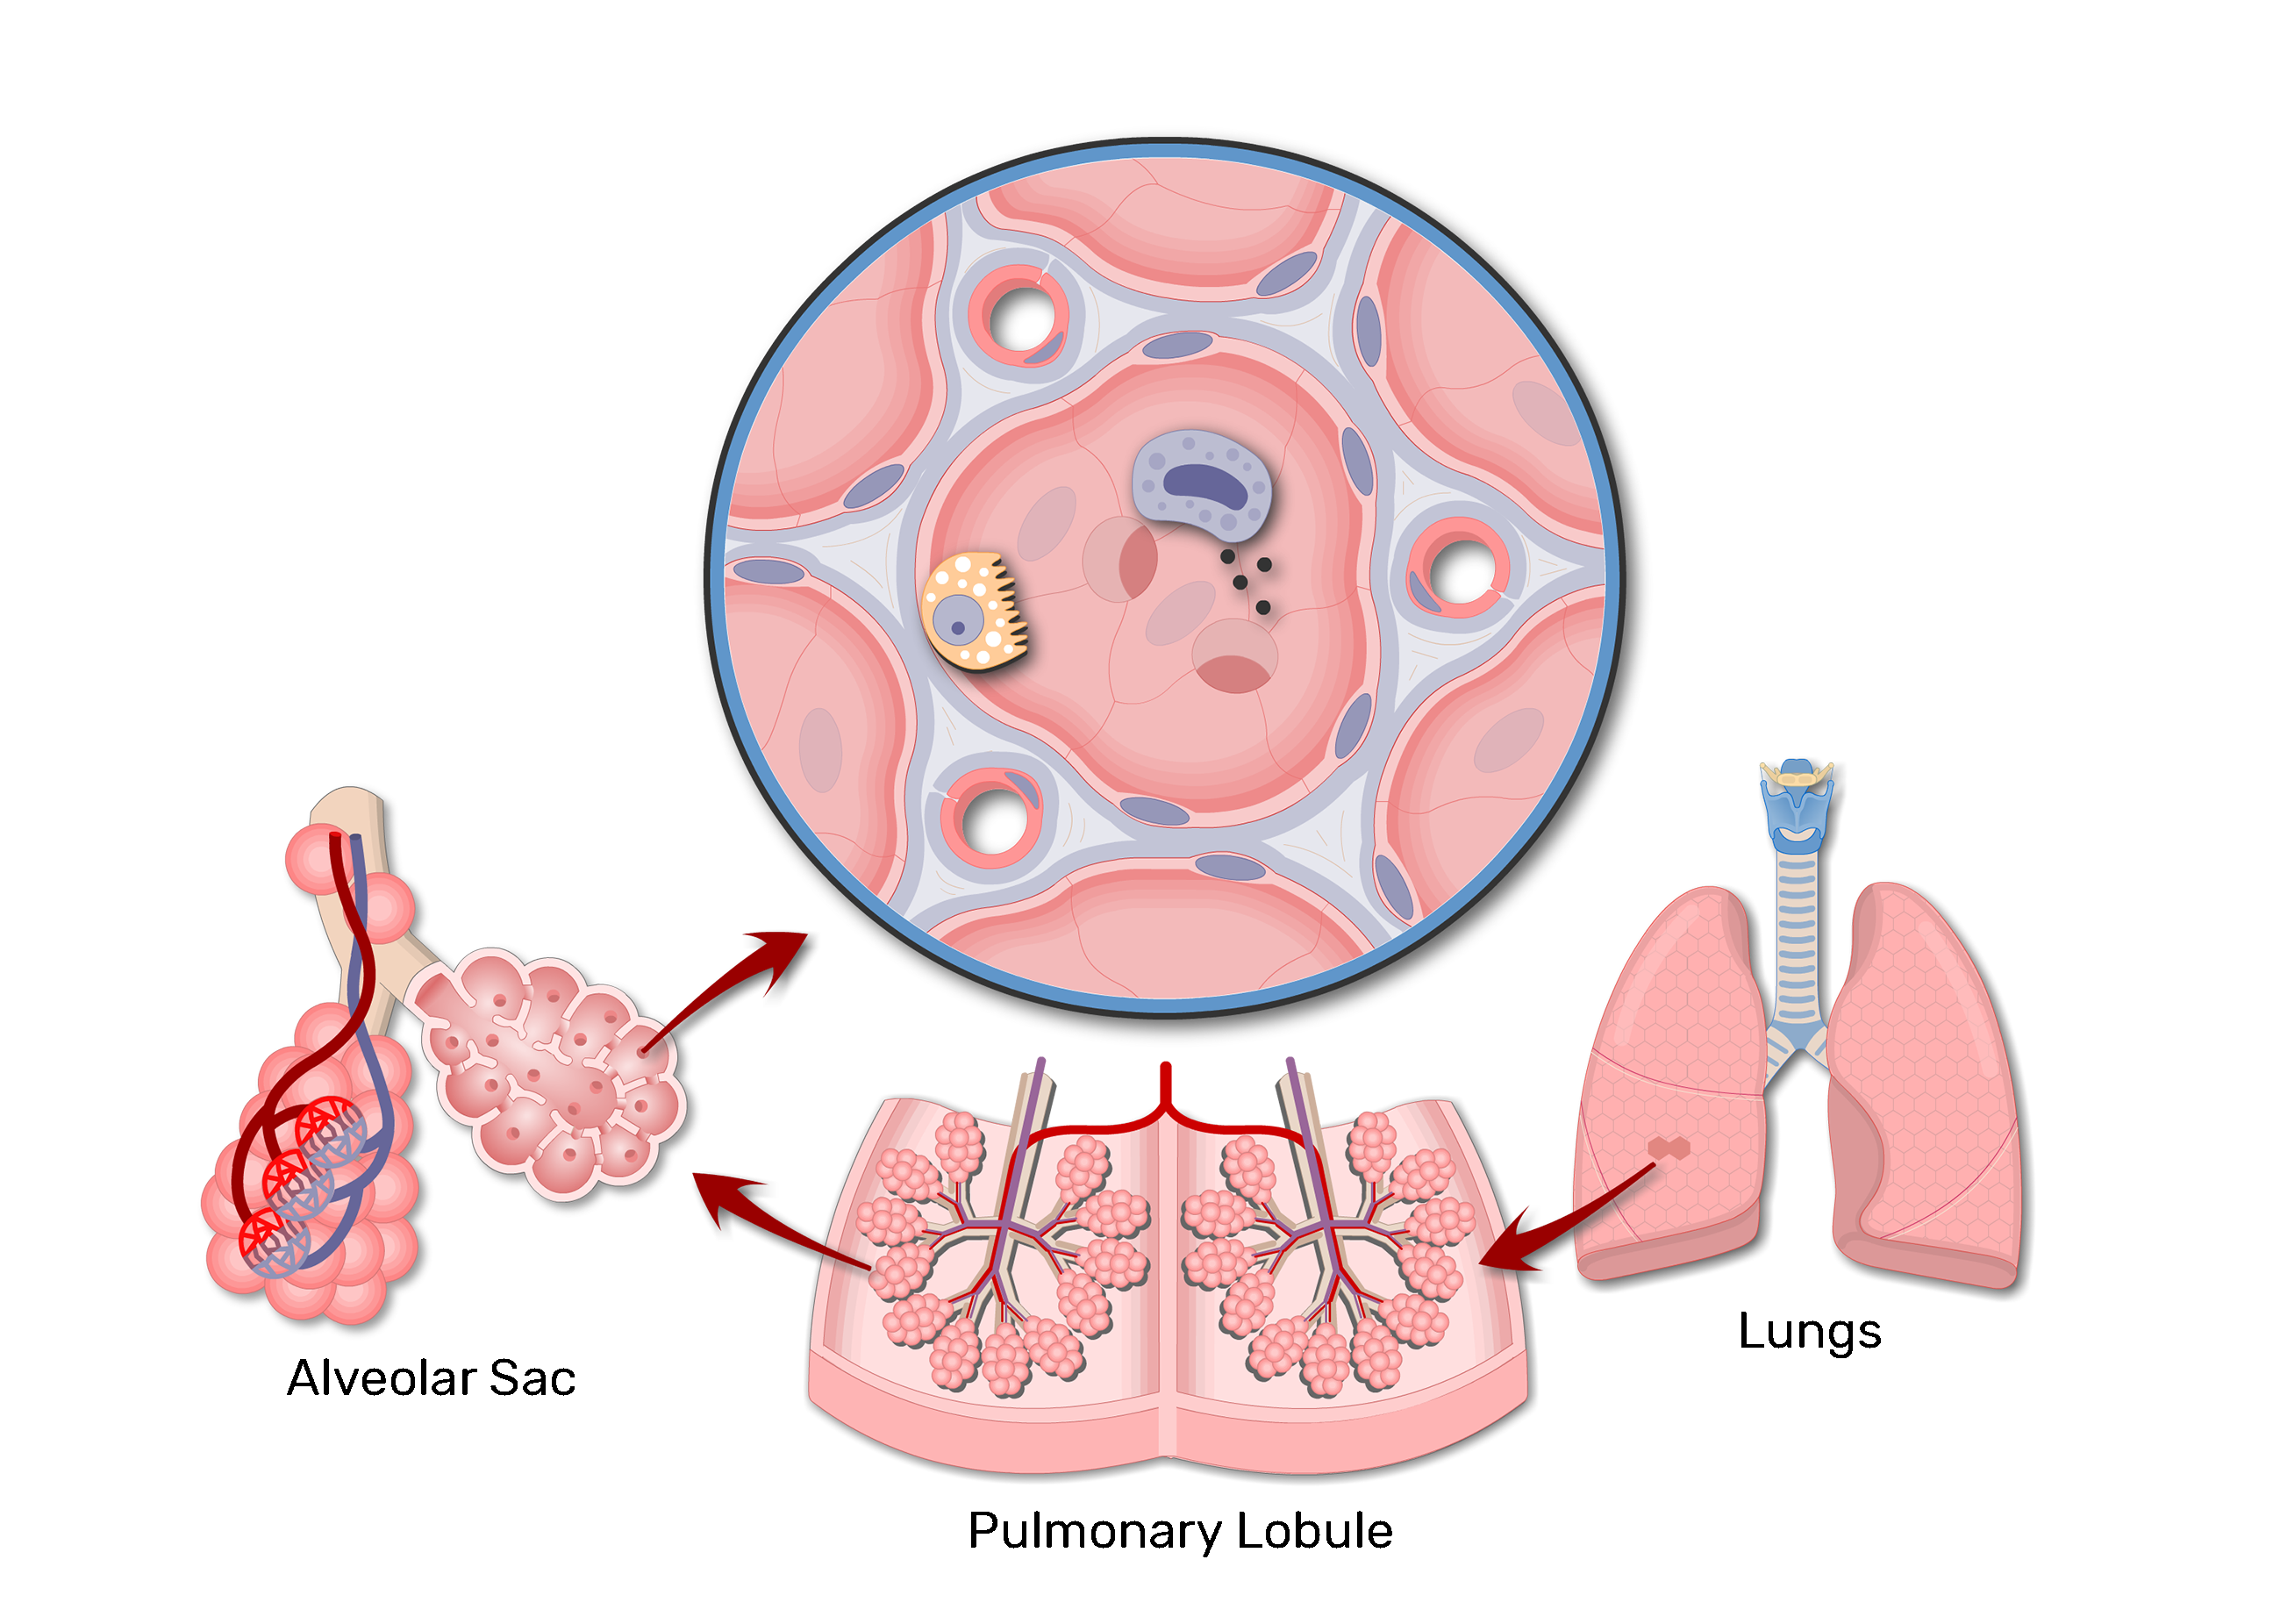 lungs clipart lung diagram